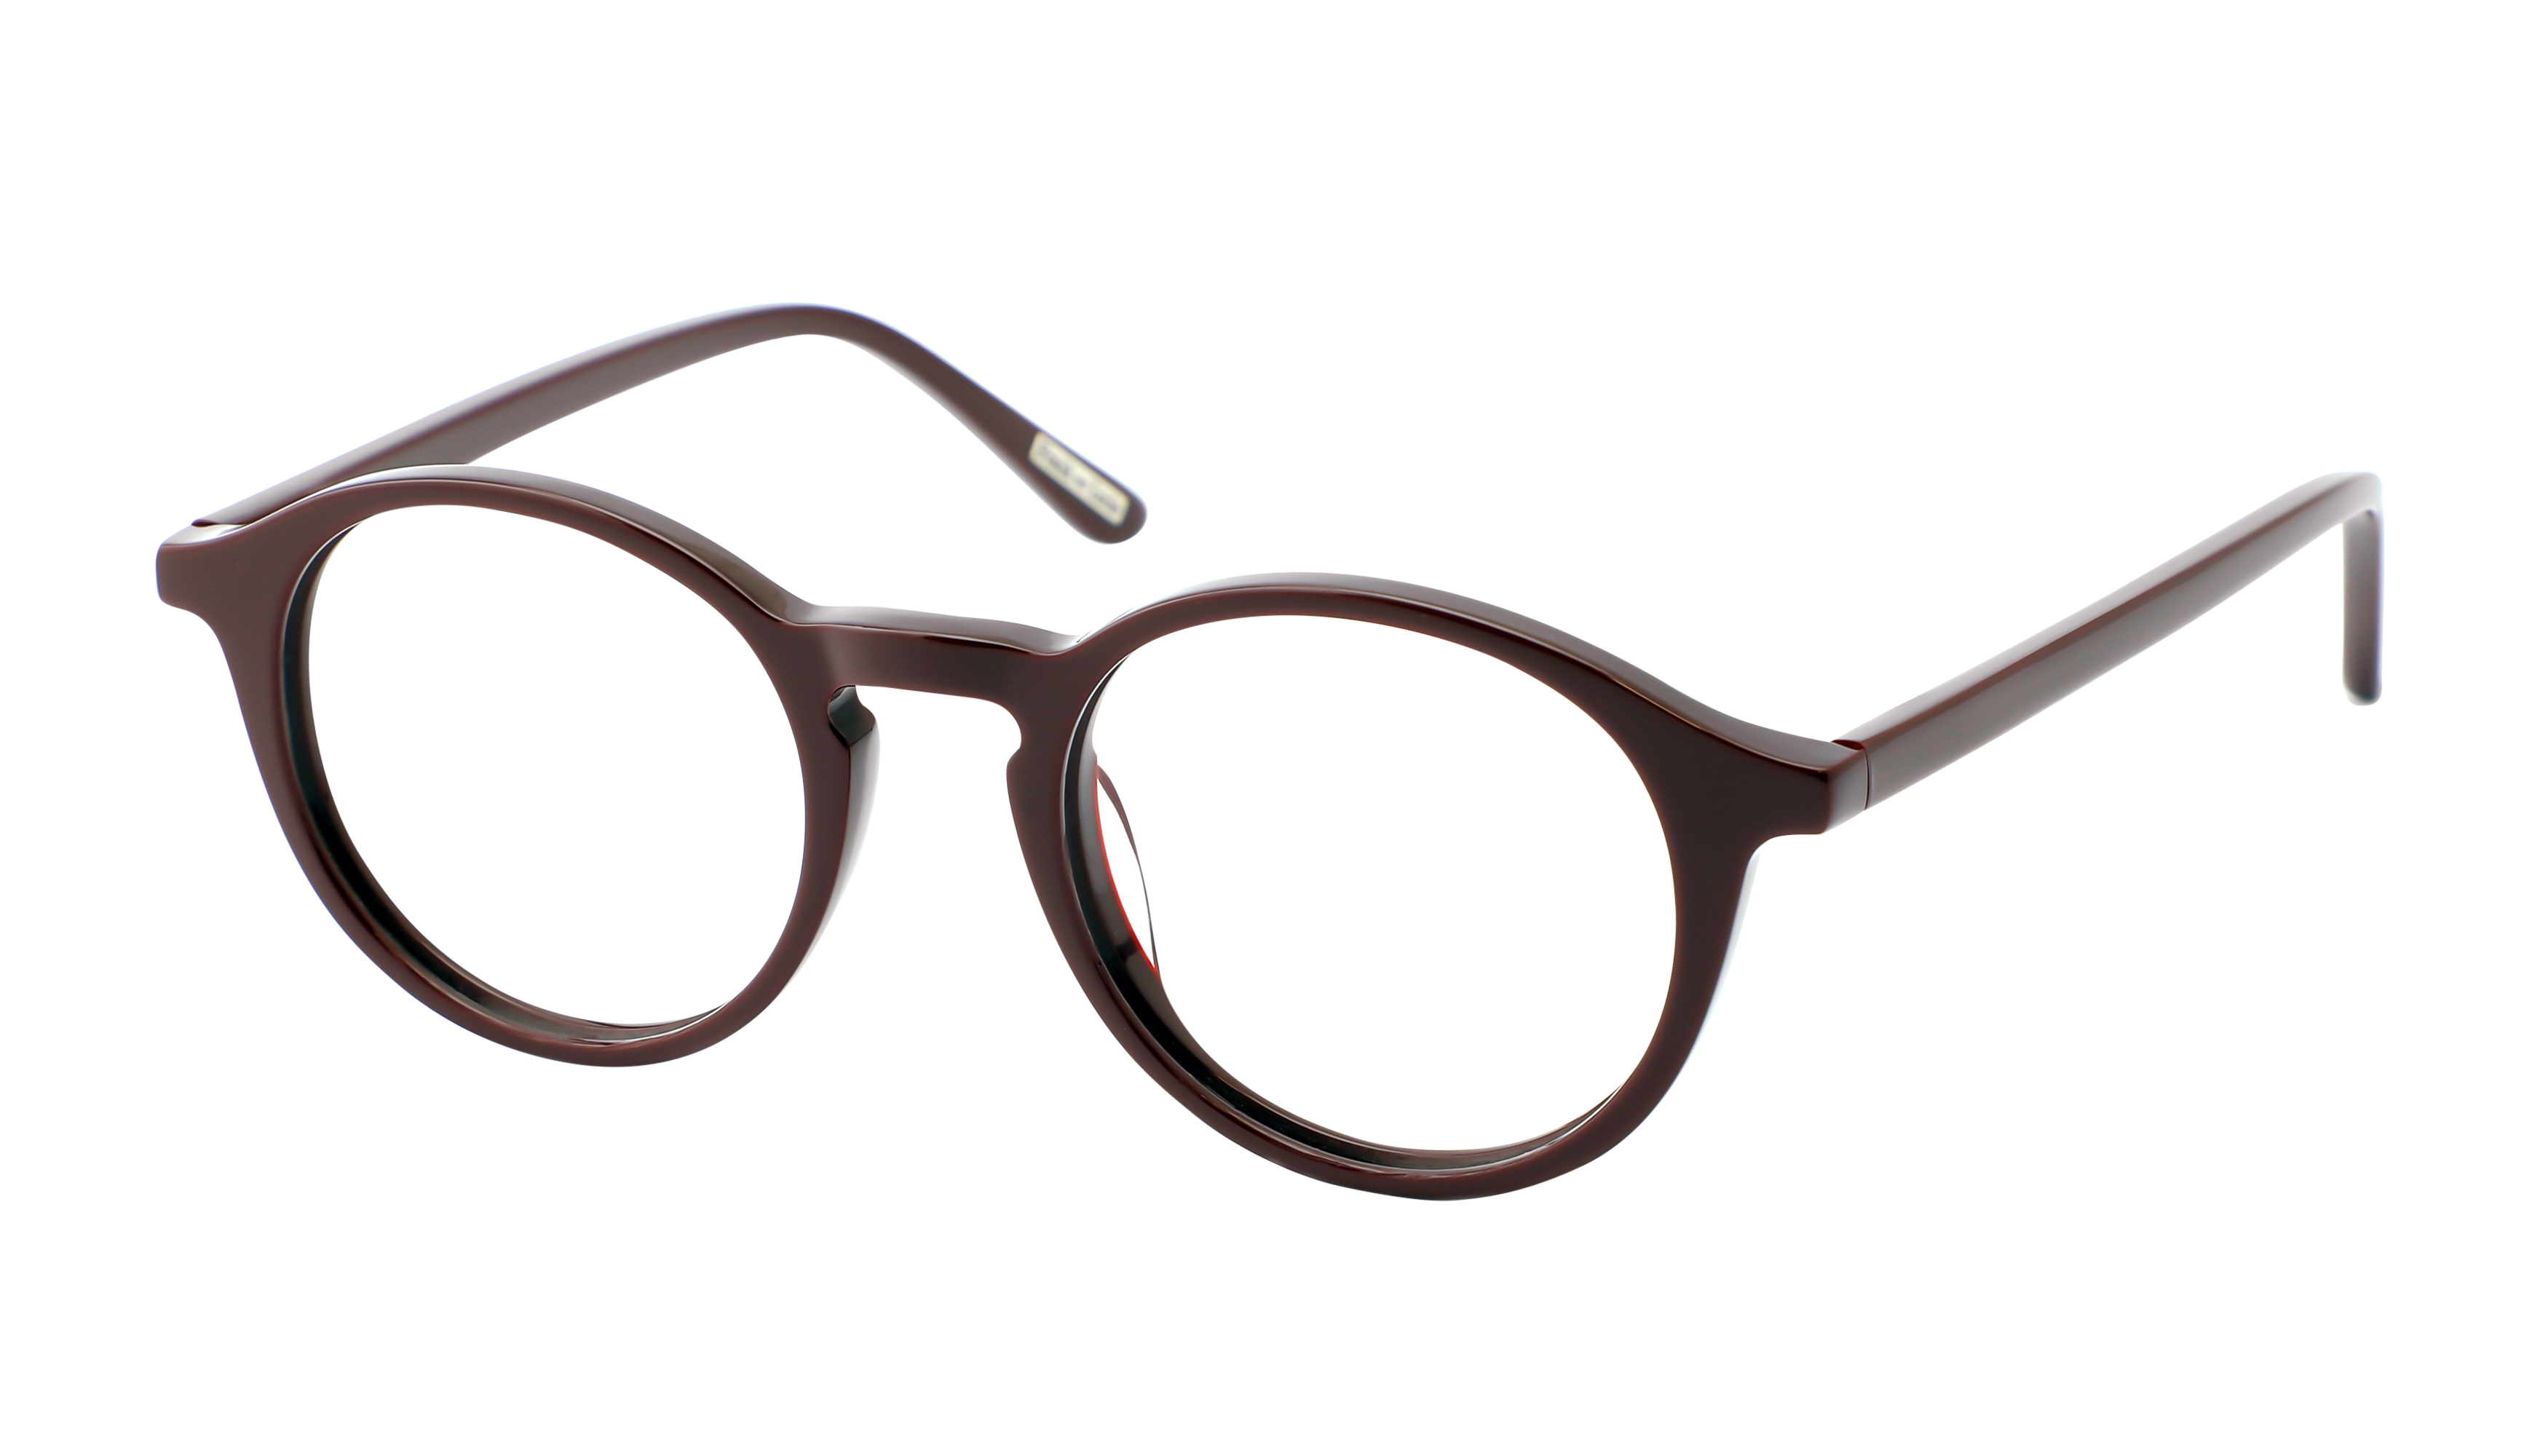 Frank and Lucie Reading Glasses Eyefresh Intense Barolo